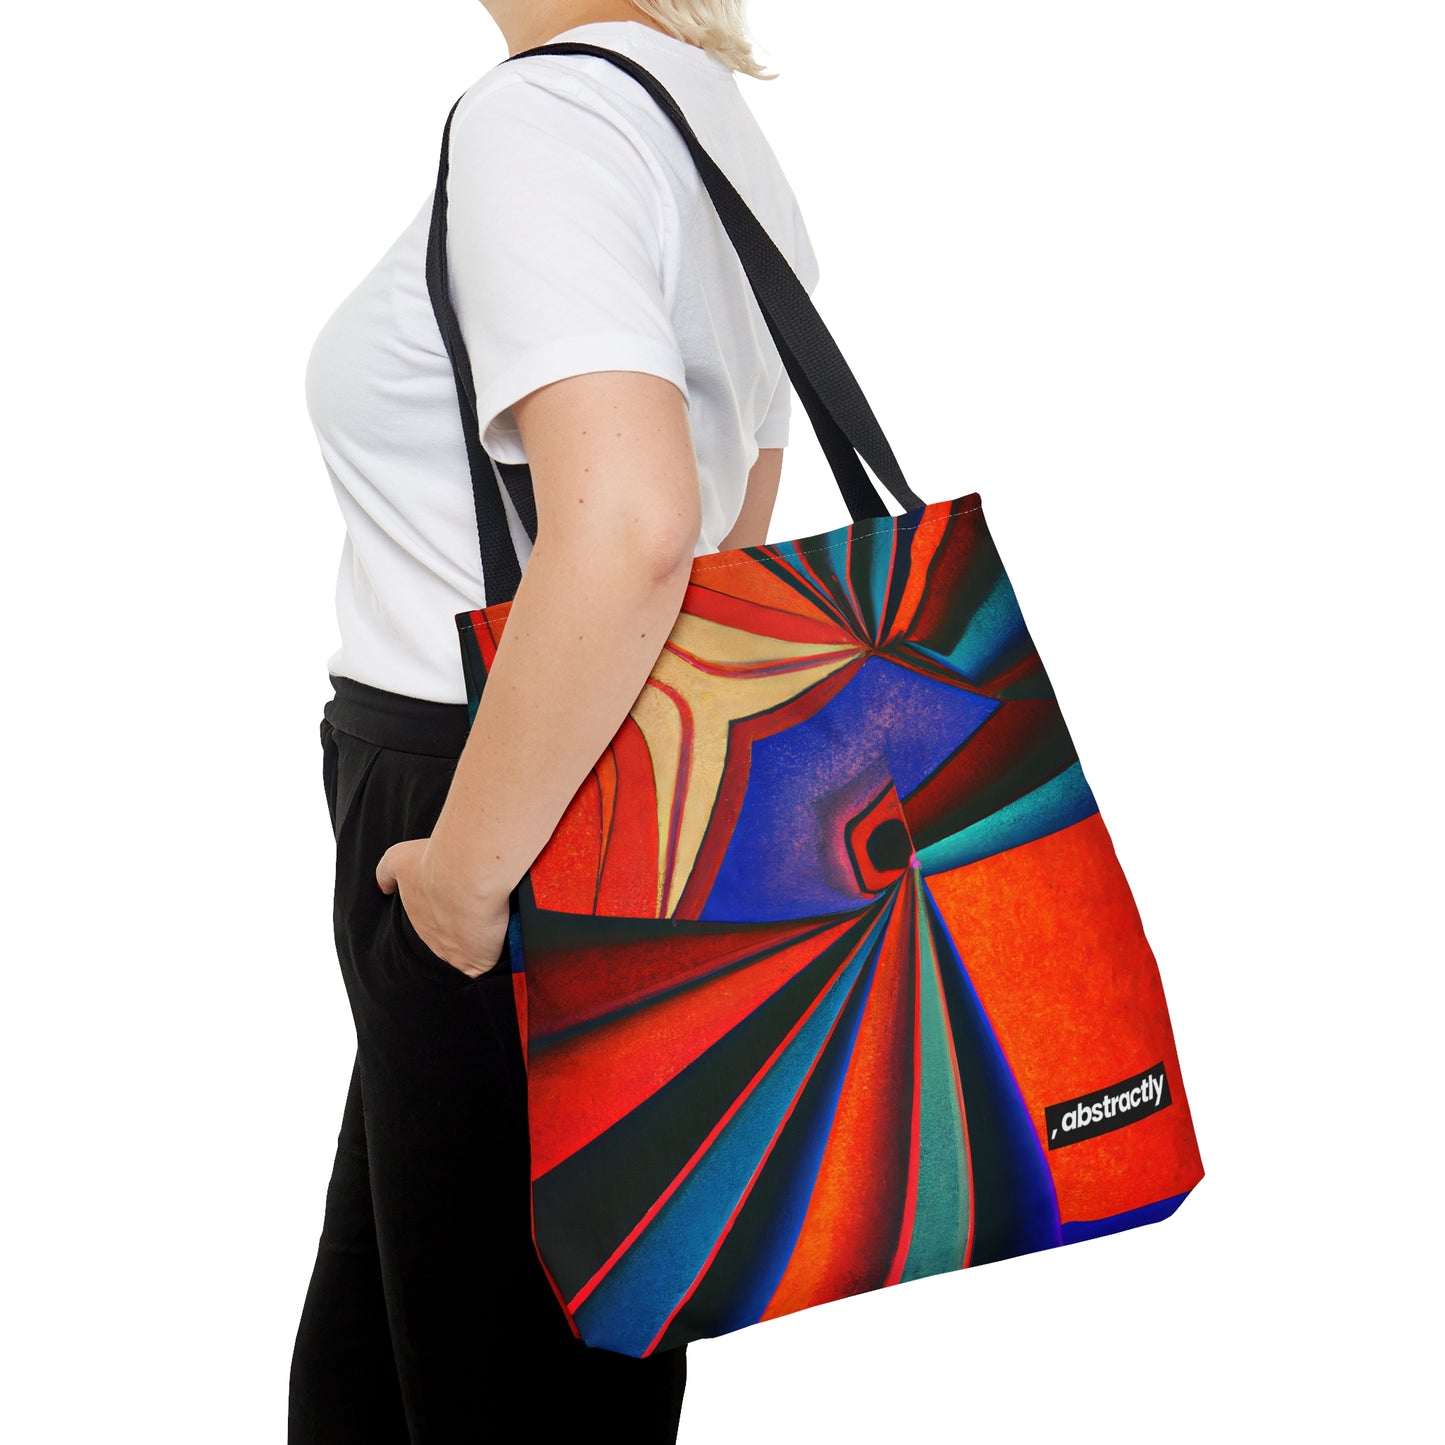 Kenneth Hadley - Weak Force, Abstractly - Tote